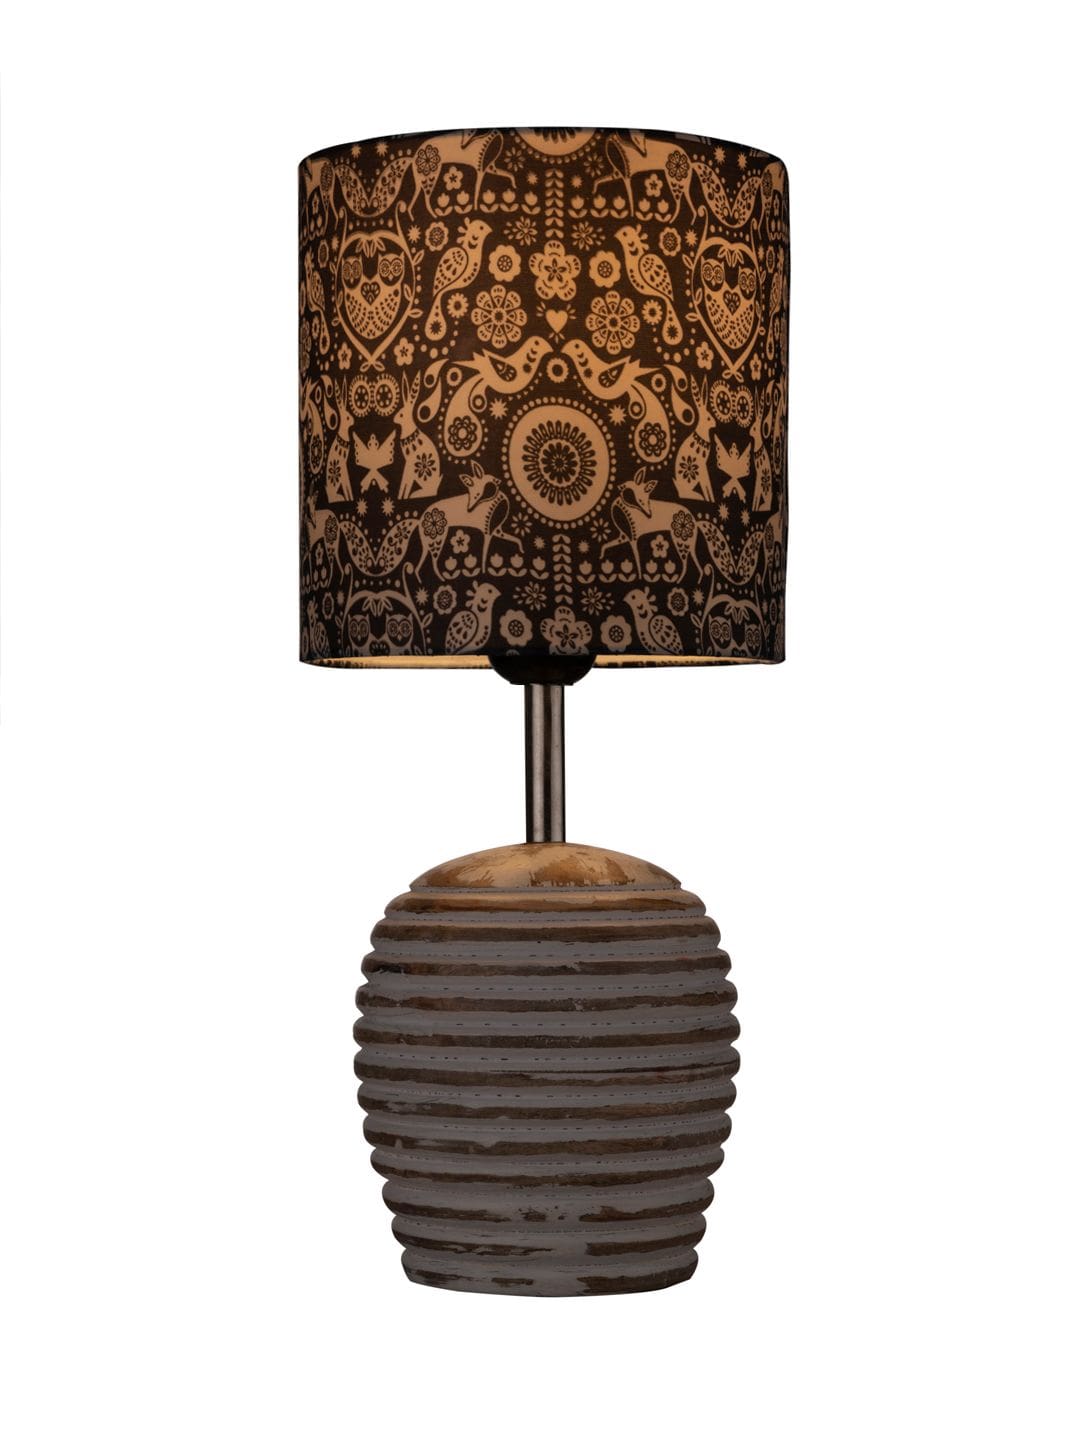 Stripped Distress White Lamp with Indian Art multicolor shade